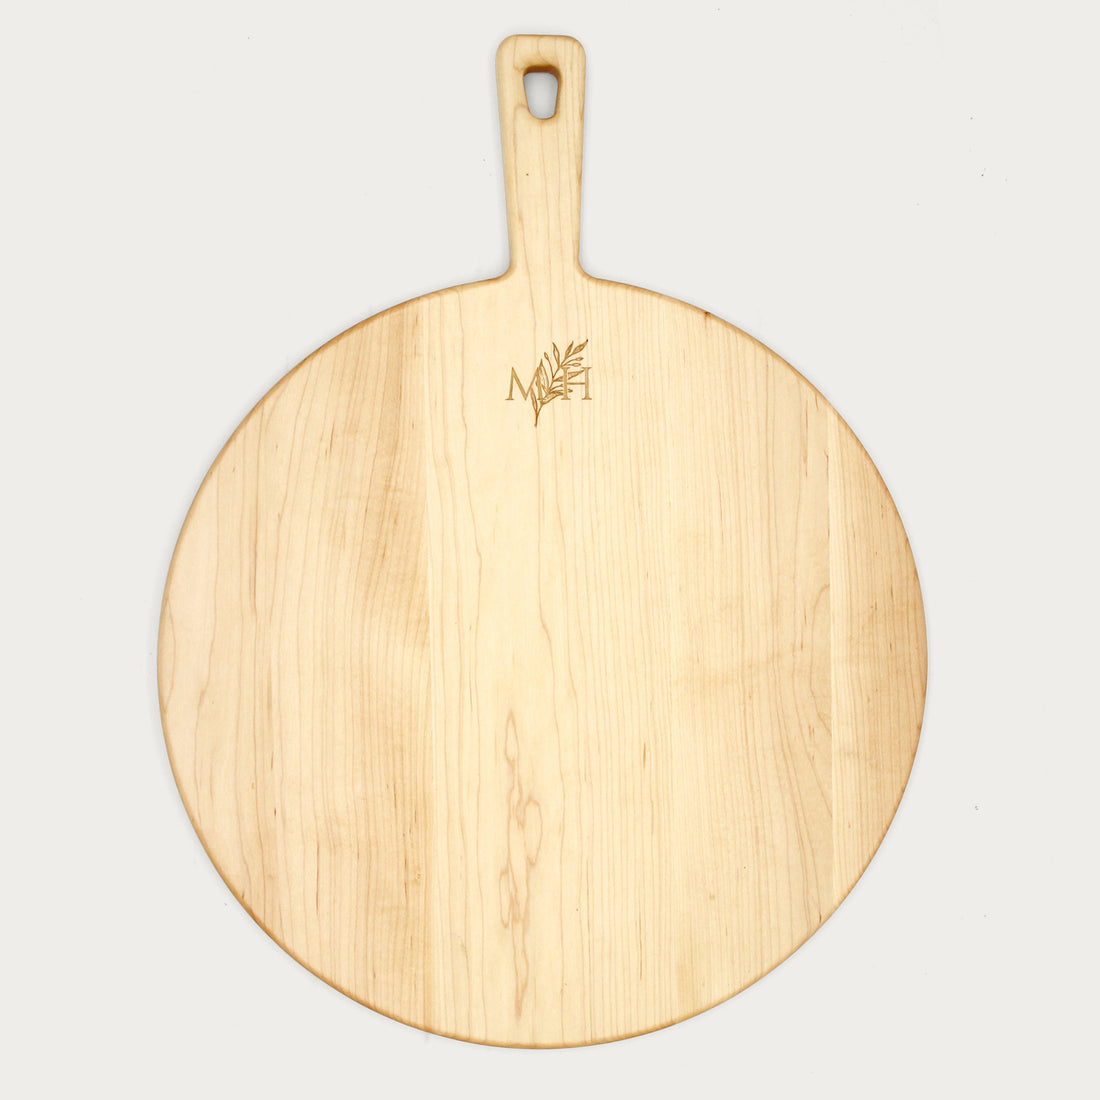 The Maple Serving Paddle